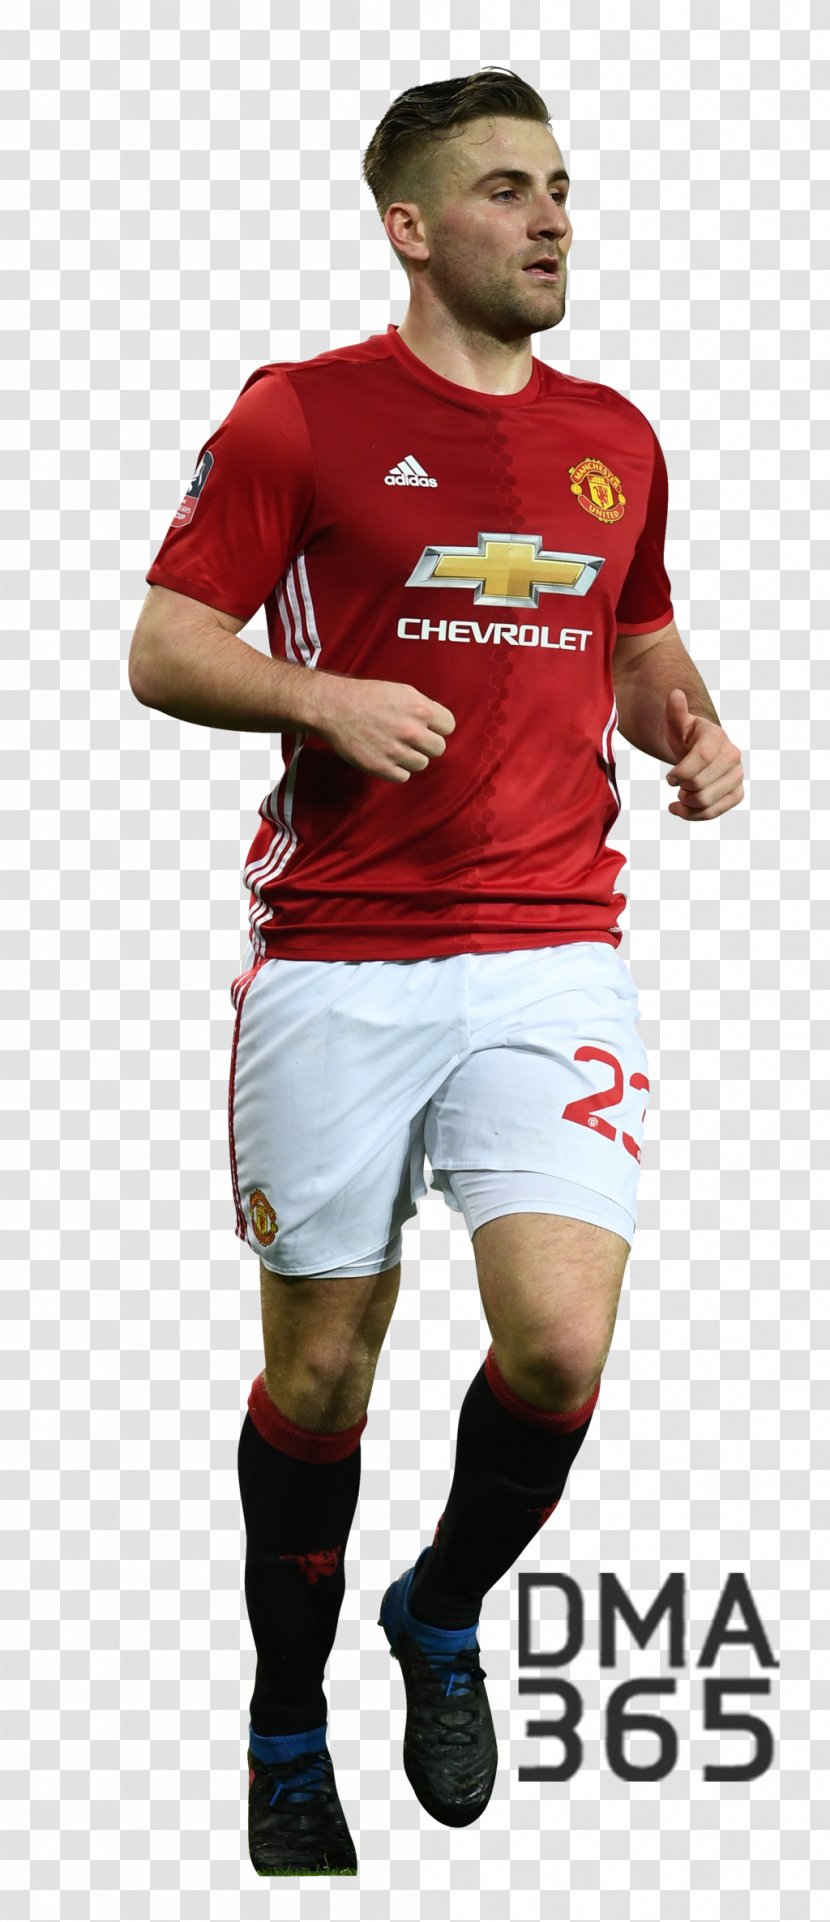 Luke Shaw Jersey Football Player - Rugby - ANTHONY Martial Transparent PNG